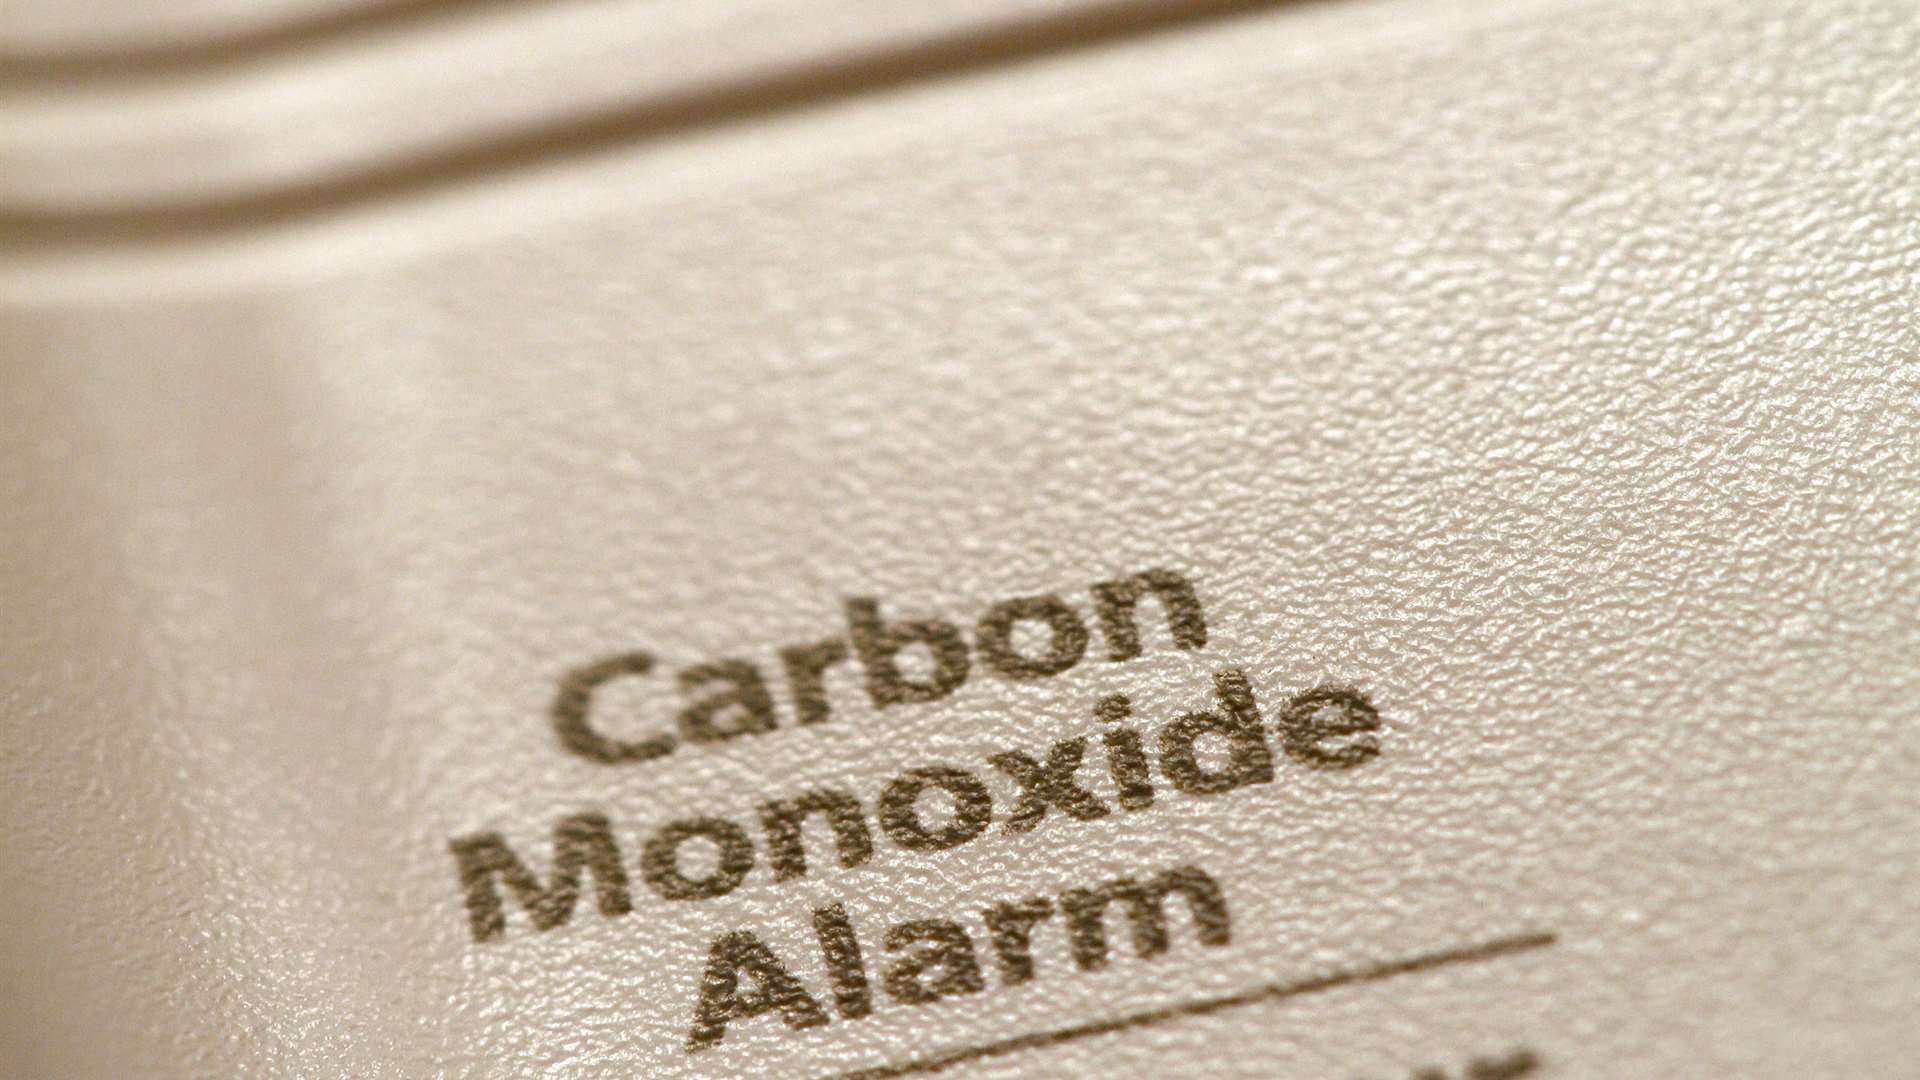 A carbon monoxide alarm costs from around £10